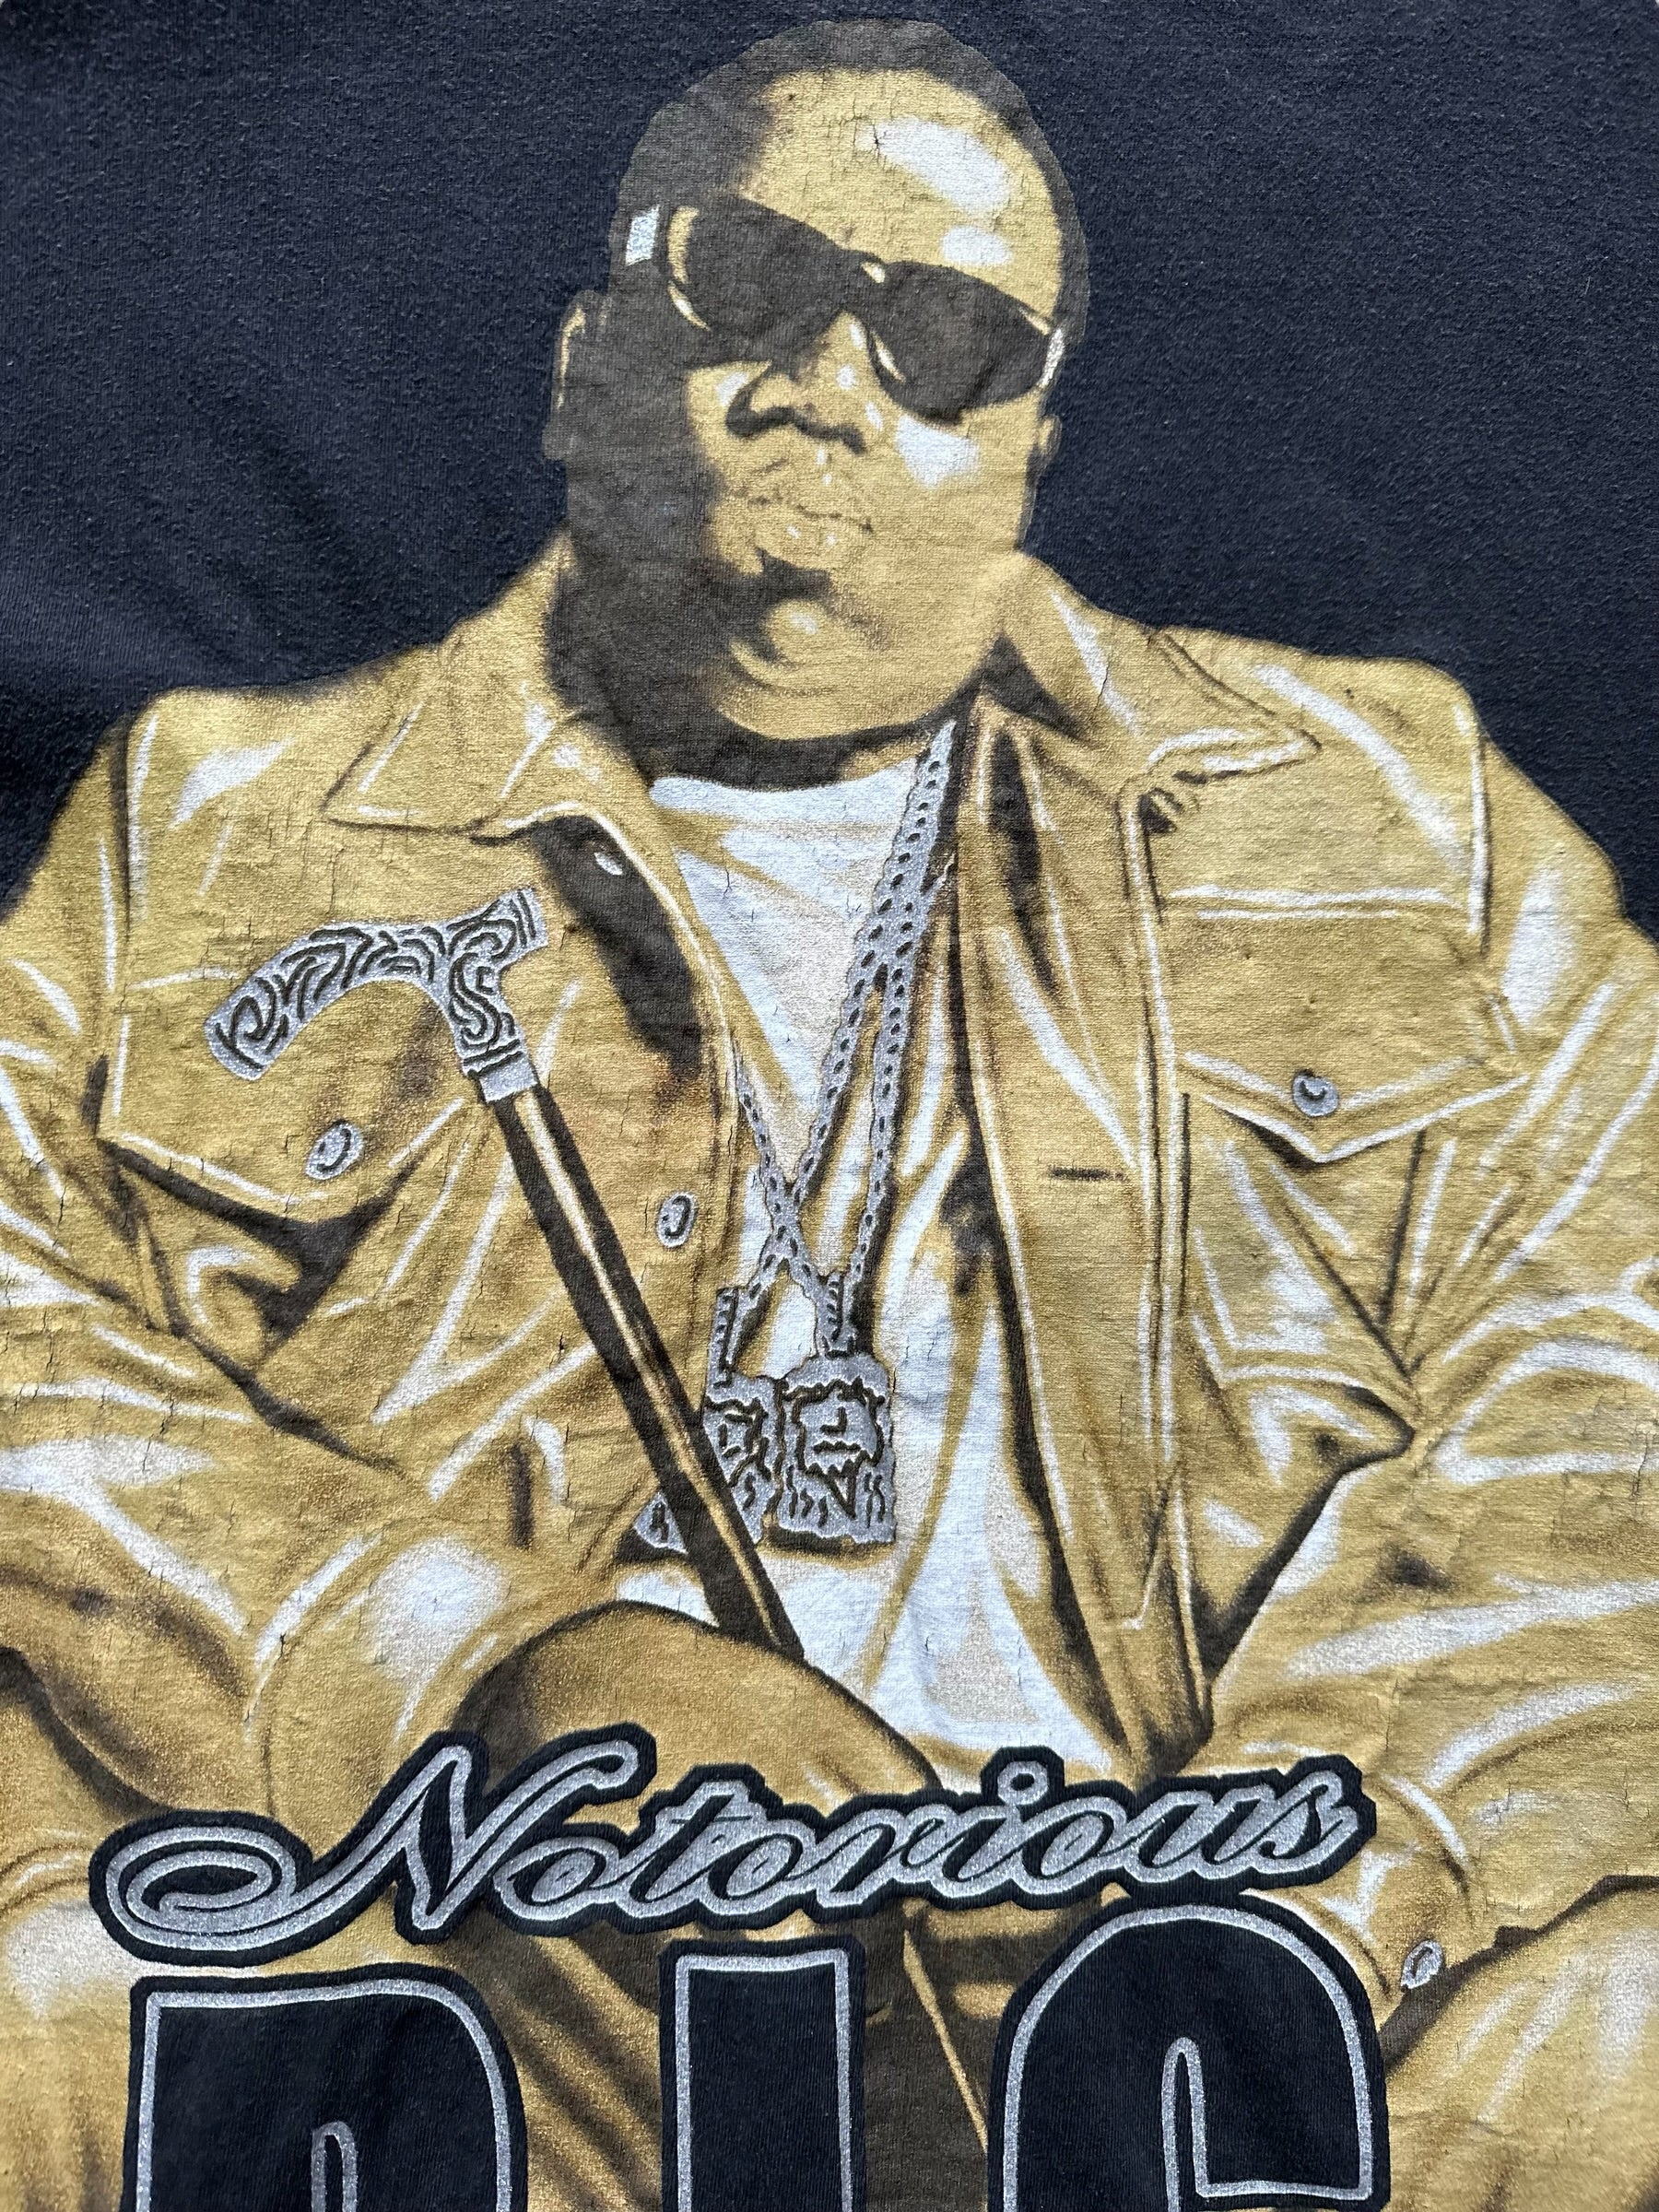 Close Up of Vintage Biggie Smalls Notorious BIG Rap Tee SZ XXL |  Vintage Rap Tees Biggy Smalls |  Christopher Wallace Notorious B.I.G.